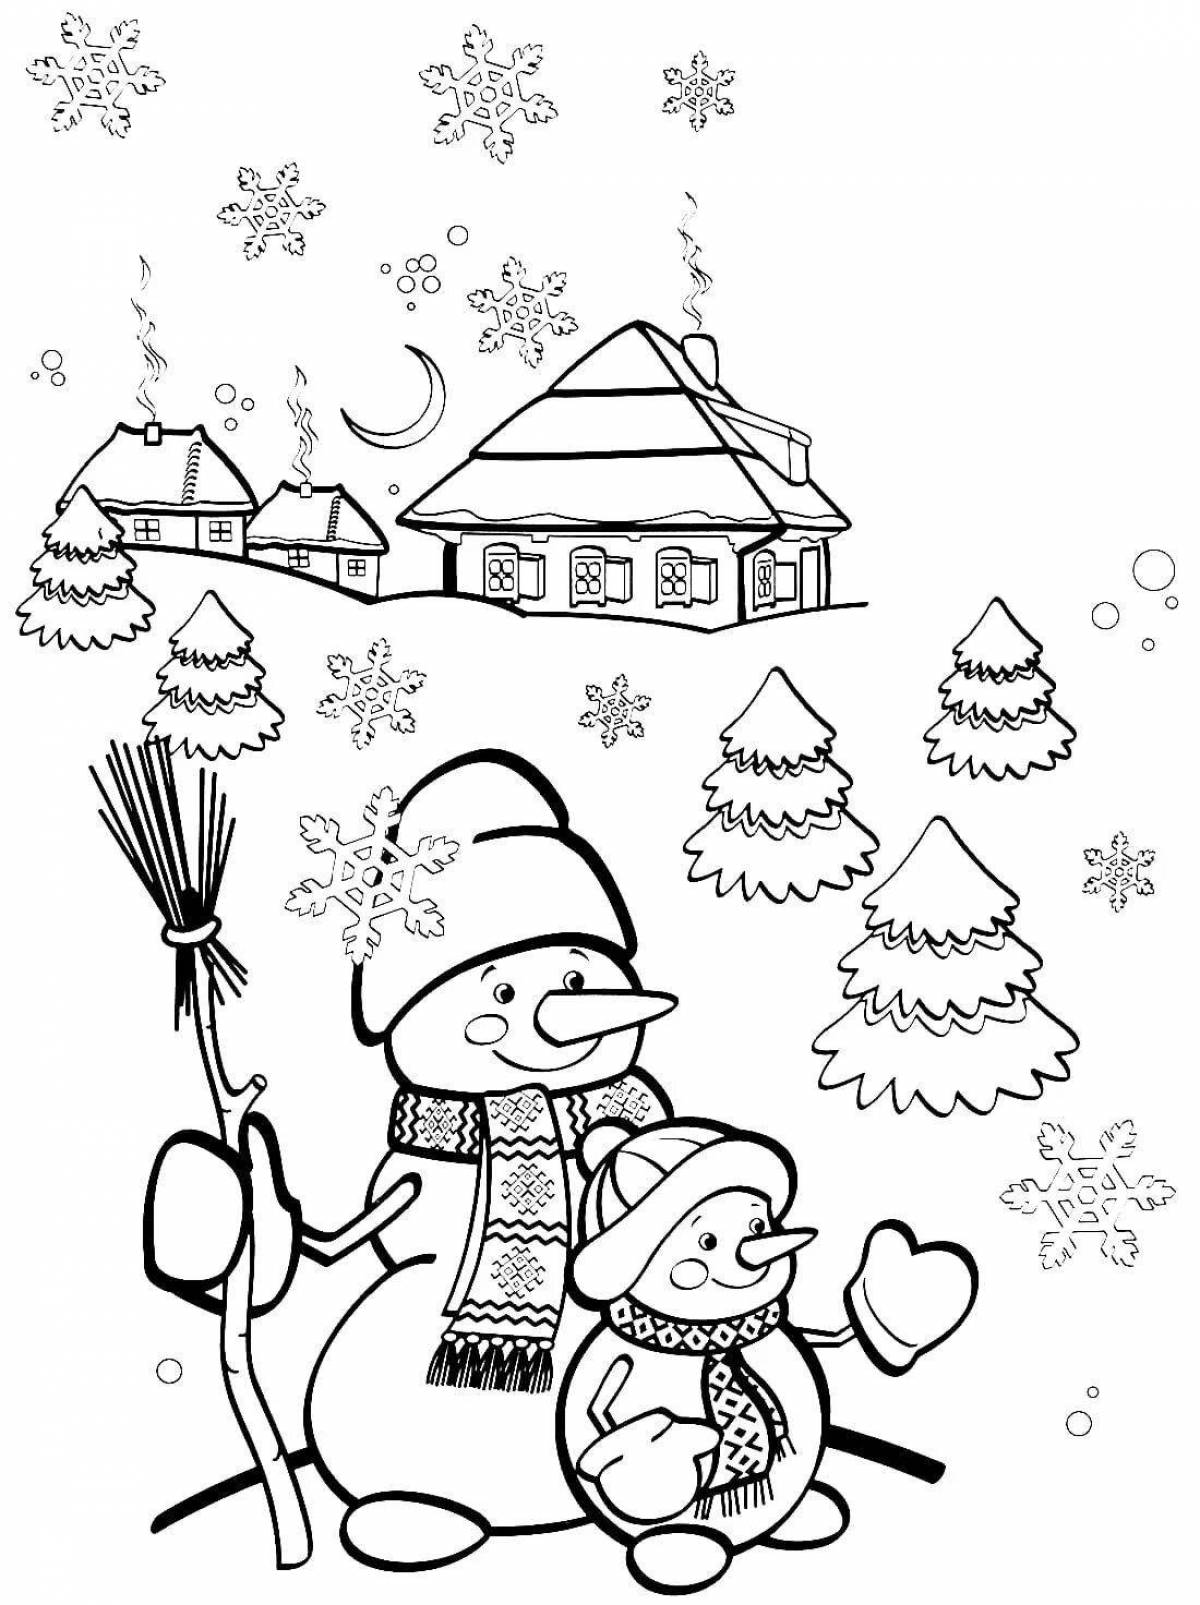 Coloring book luxury tree and snowman